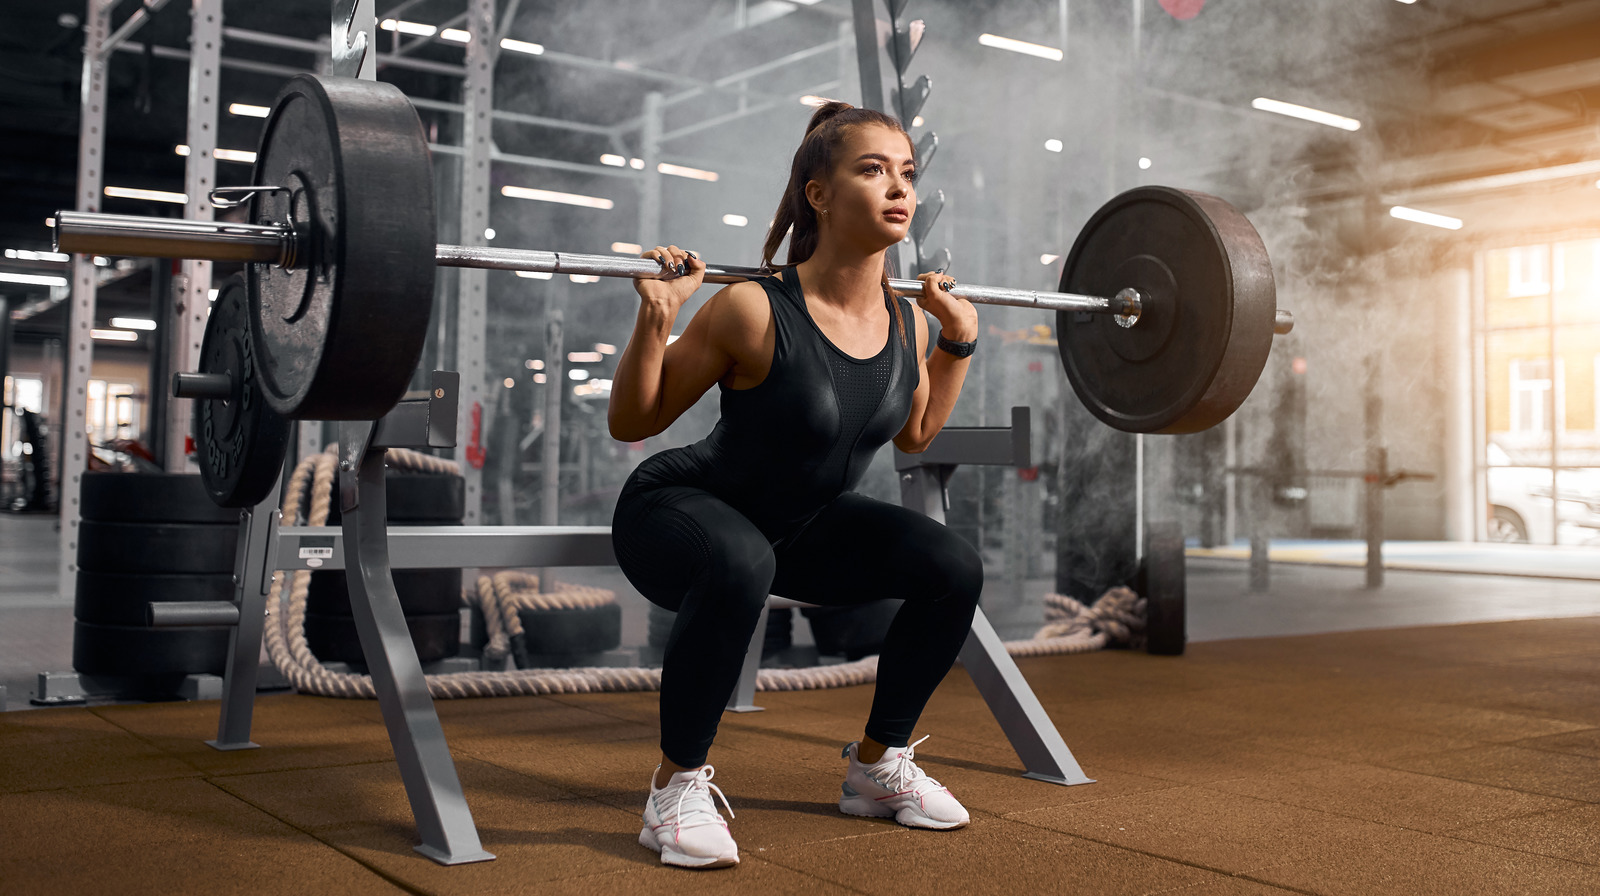 Are squats with weights more effective for health and fitness?